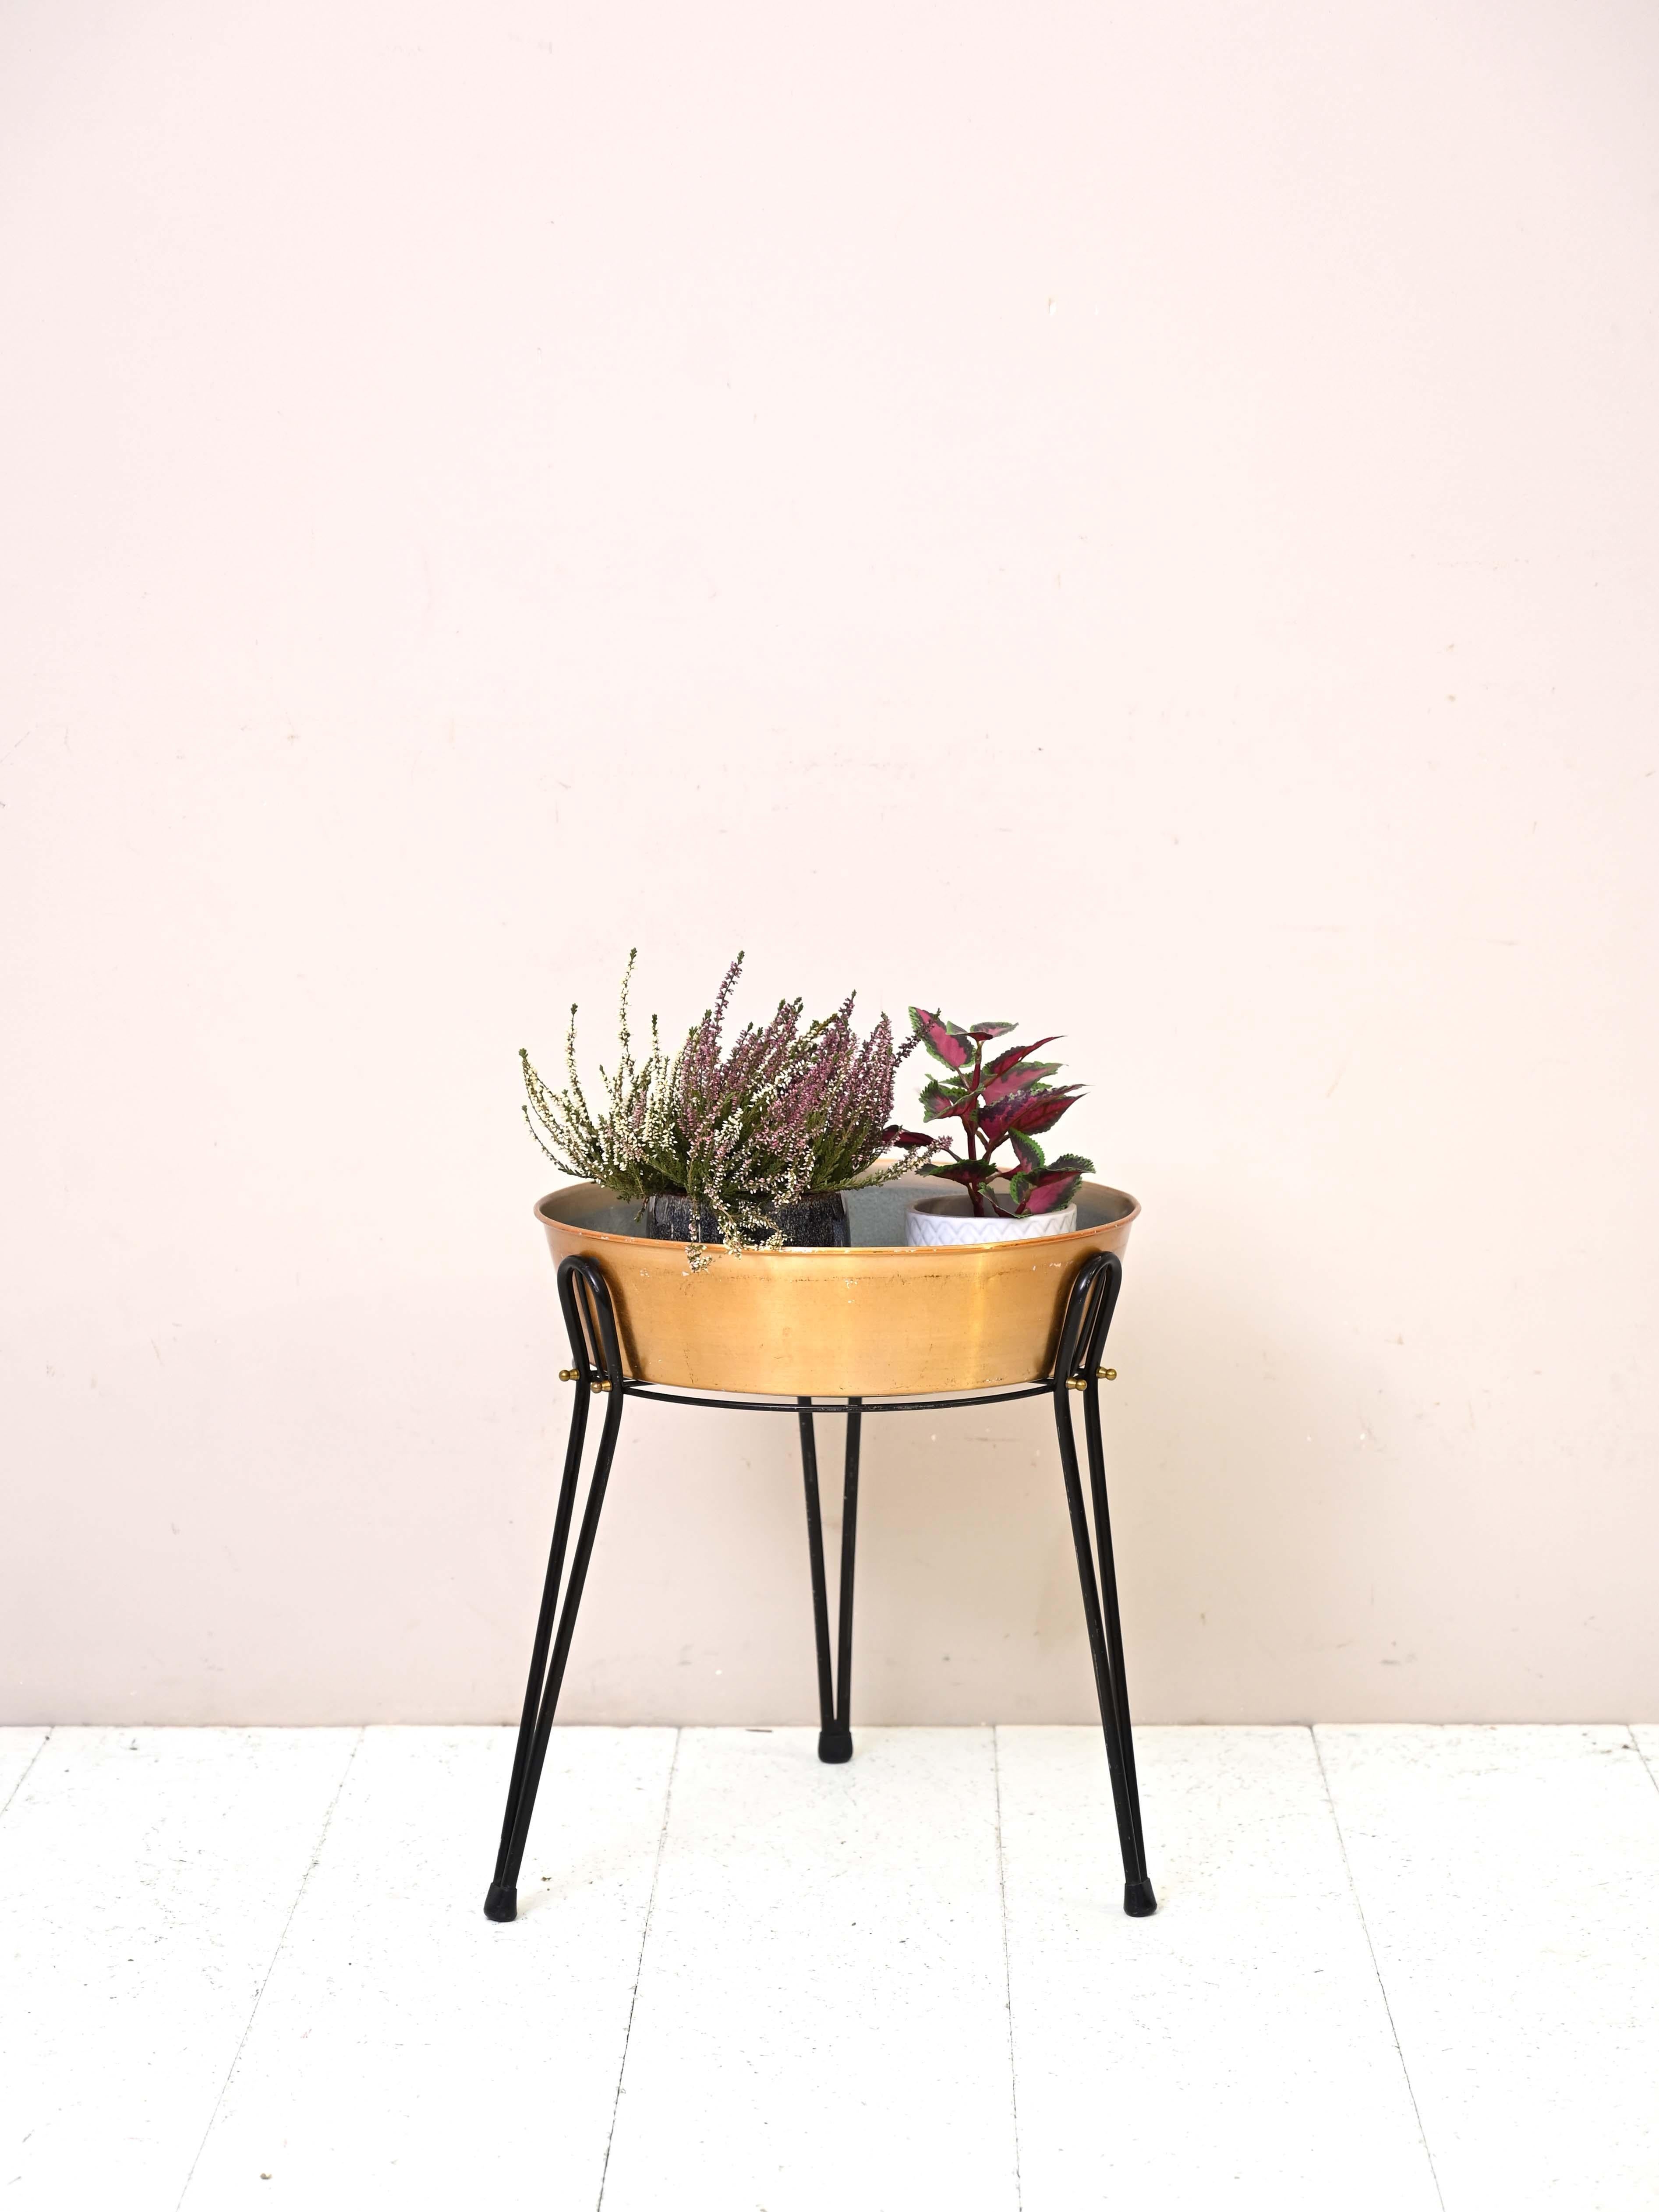 Original Scandinavian planter.

A practical and small item to be used as a riser and pot for plants.
The structure consists of a copper-plated metal base that rests on black-painted metal legs. The feet have rubber toe caps to keep them from